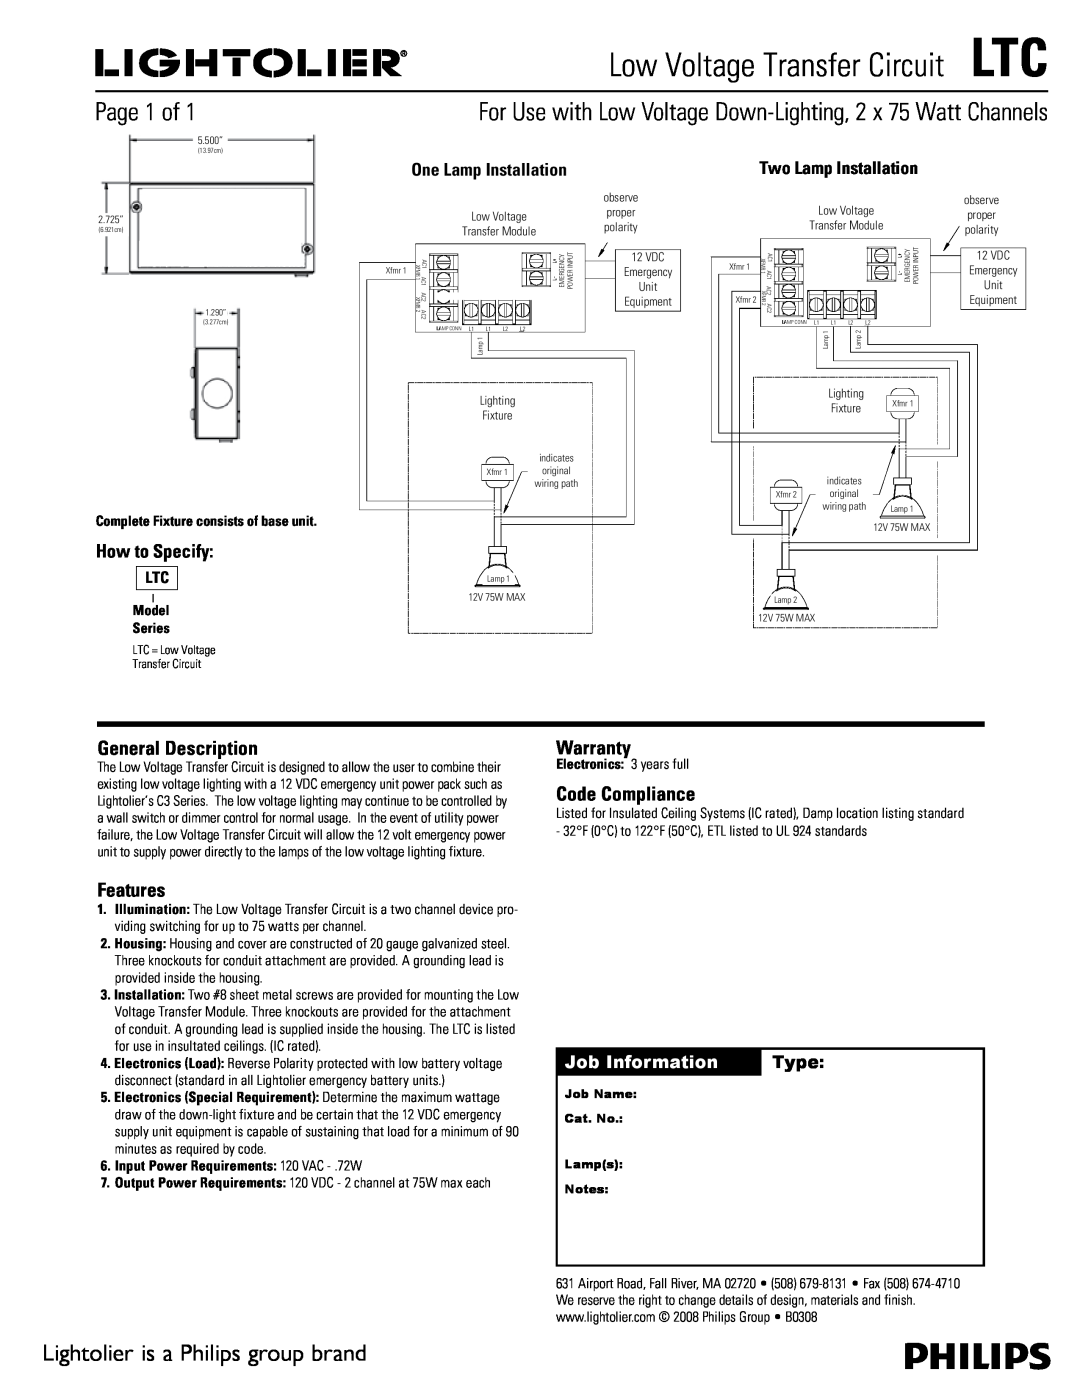 Lightolier warranty Low Voltage Transfer CircuitLTC, Page 1 of, Lightolier is a Philips group brand, Warranty, Features 